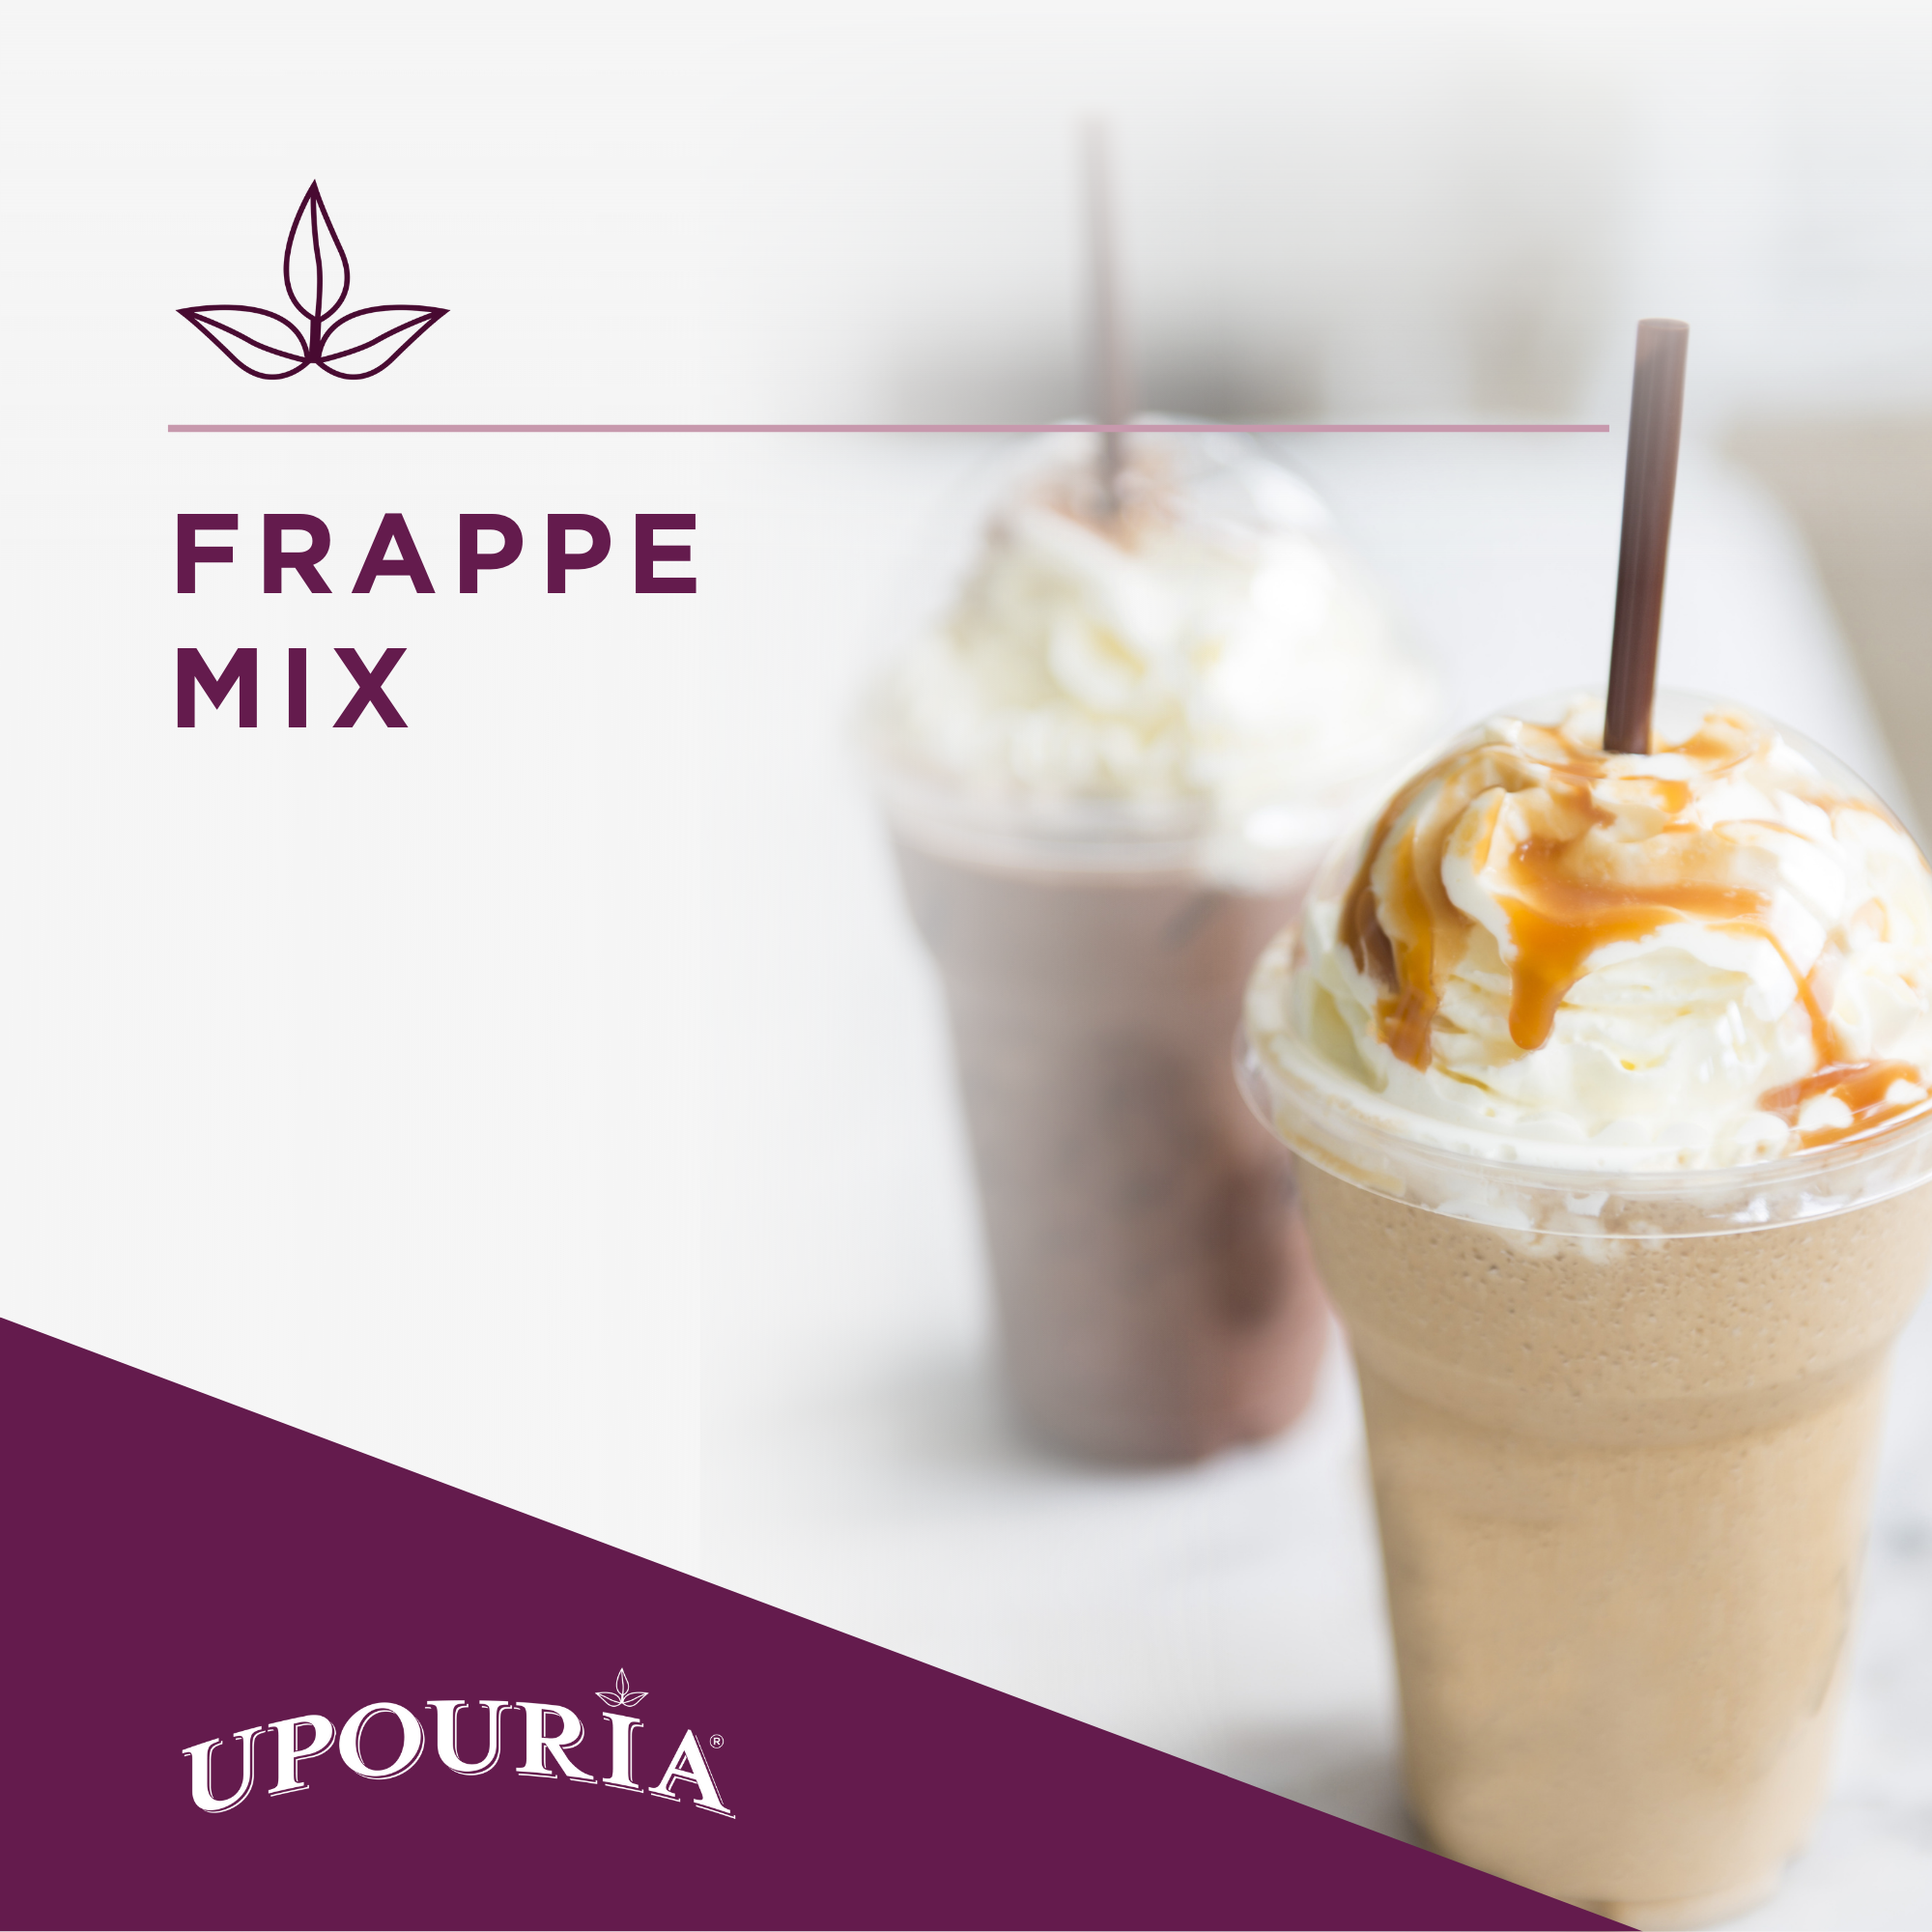 Upouria Frappe Mix Featured Image 2022